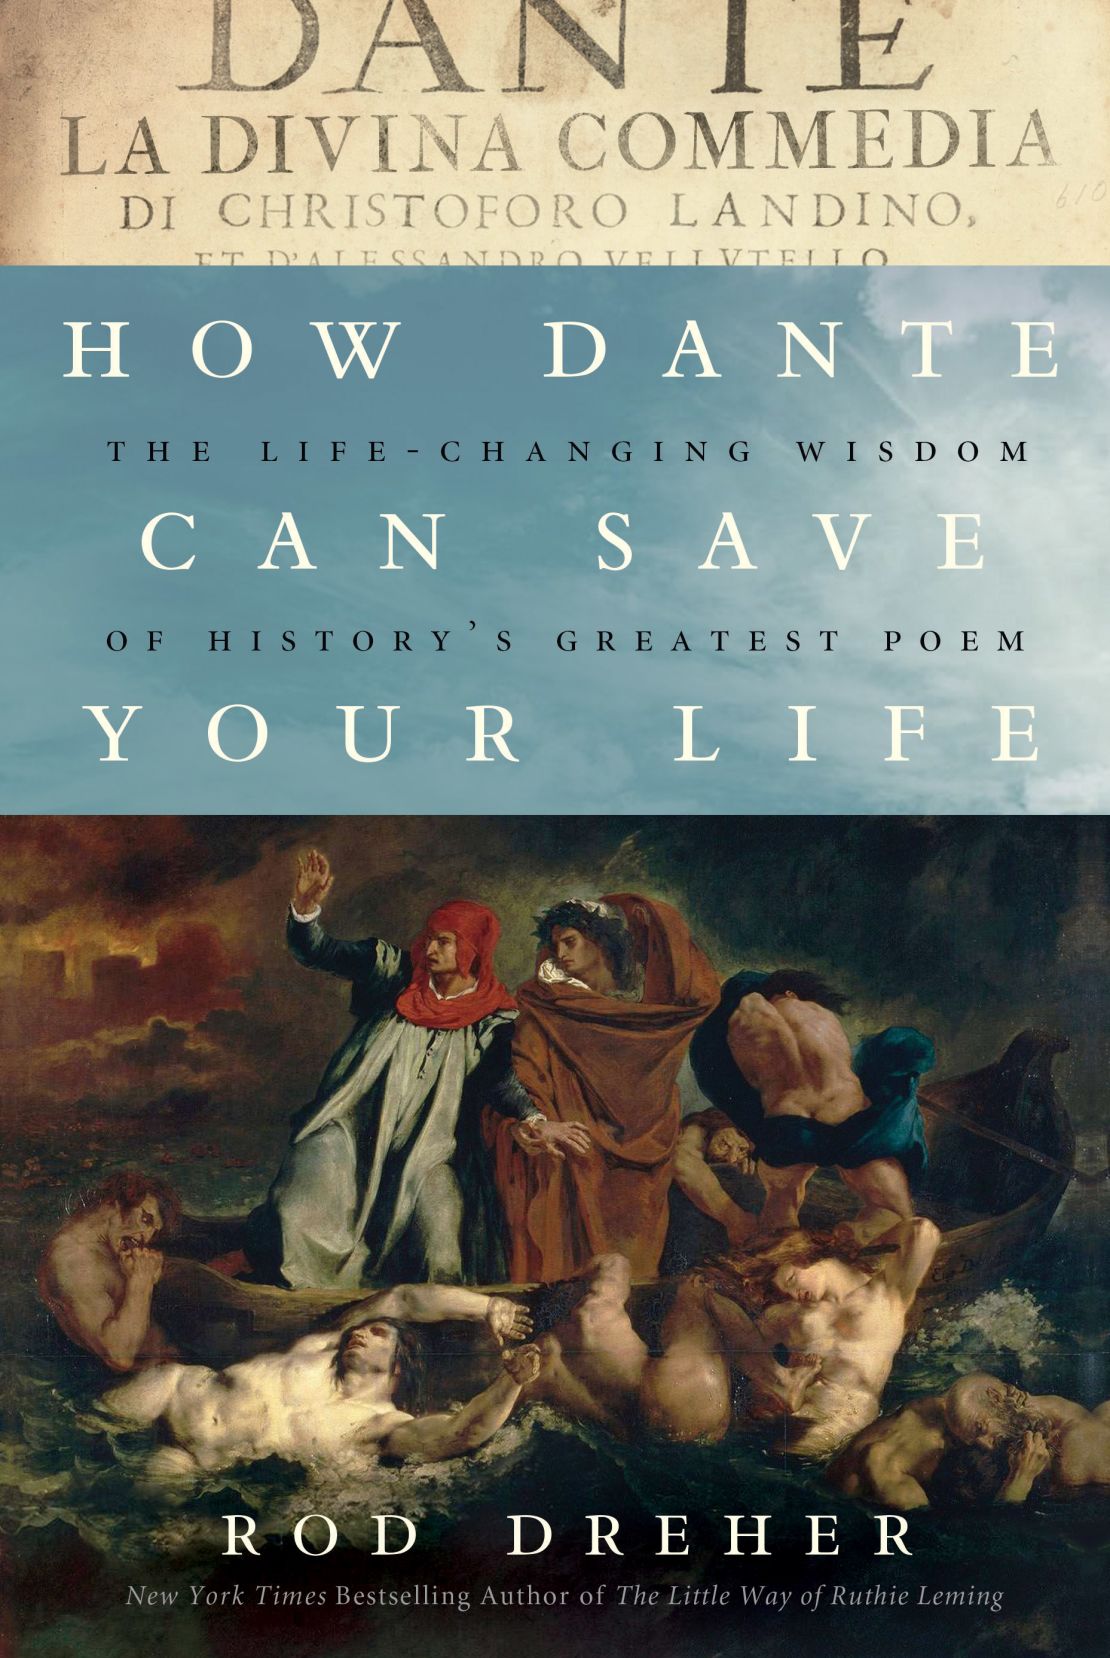 "I had made a mistake that the devout Dante did not," Dreher writes. "I expected more from [the fathers of the Catholic Church] than they could deliver, and came undone by the shock of their failures."